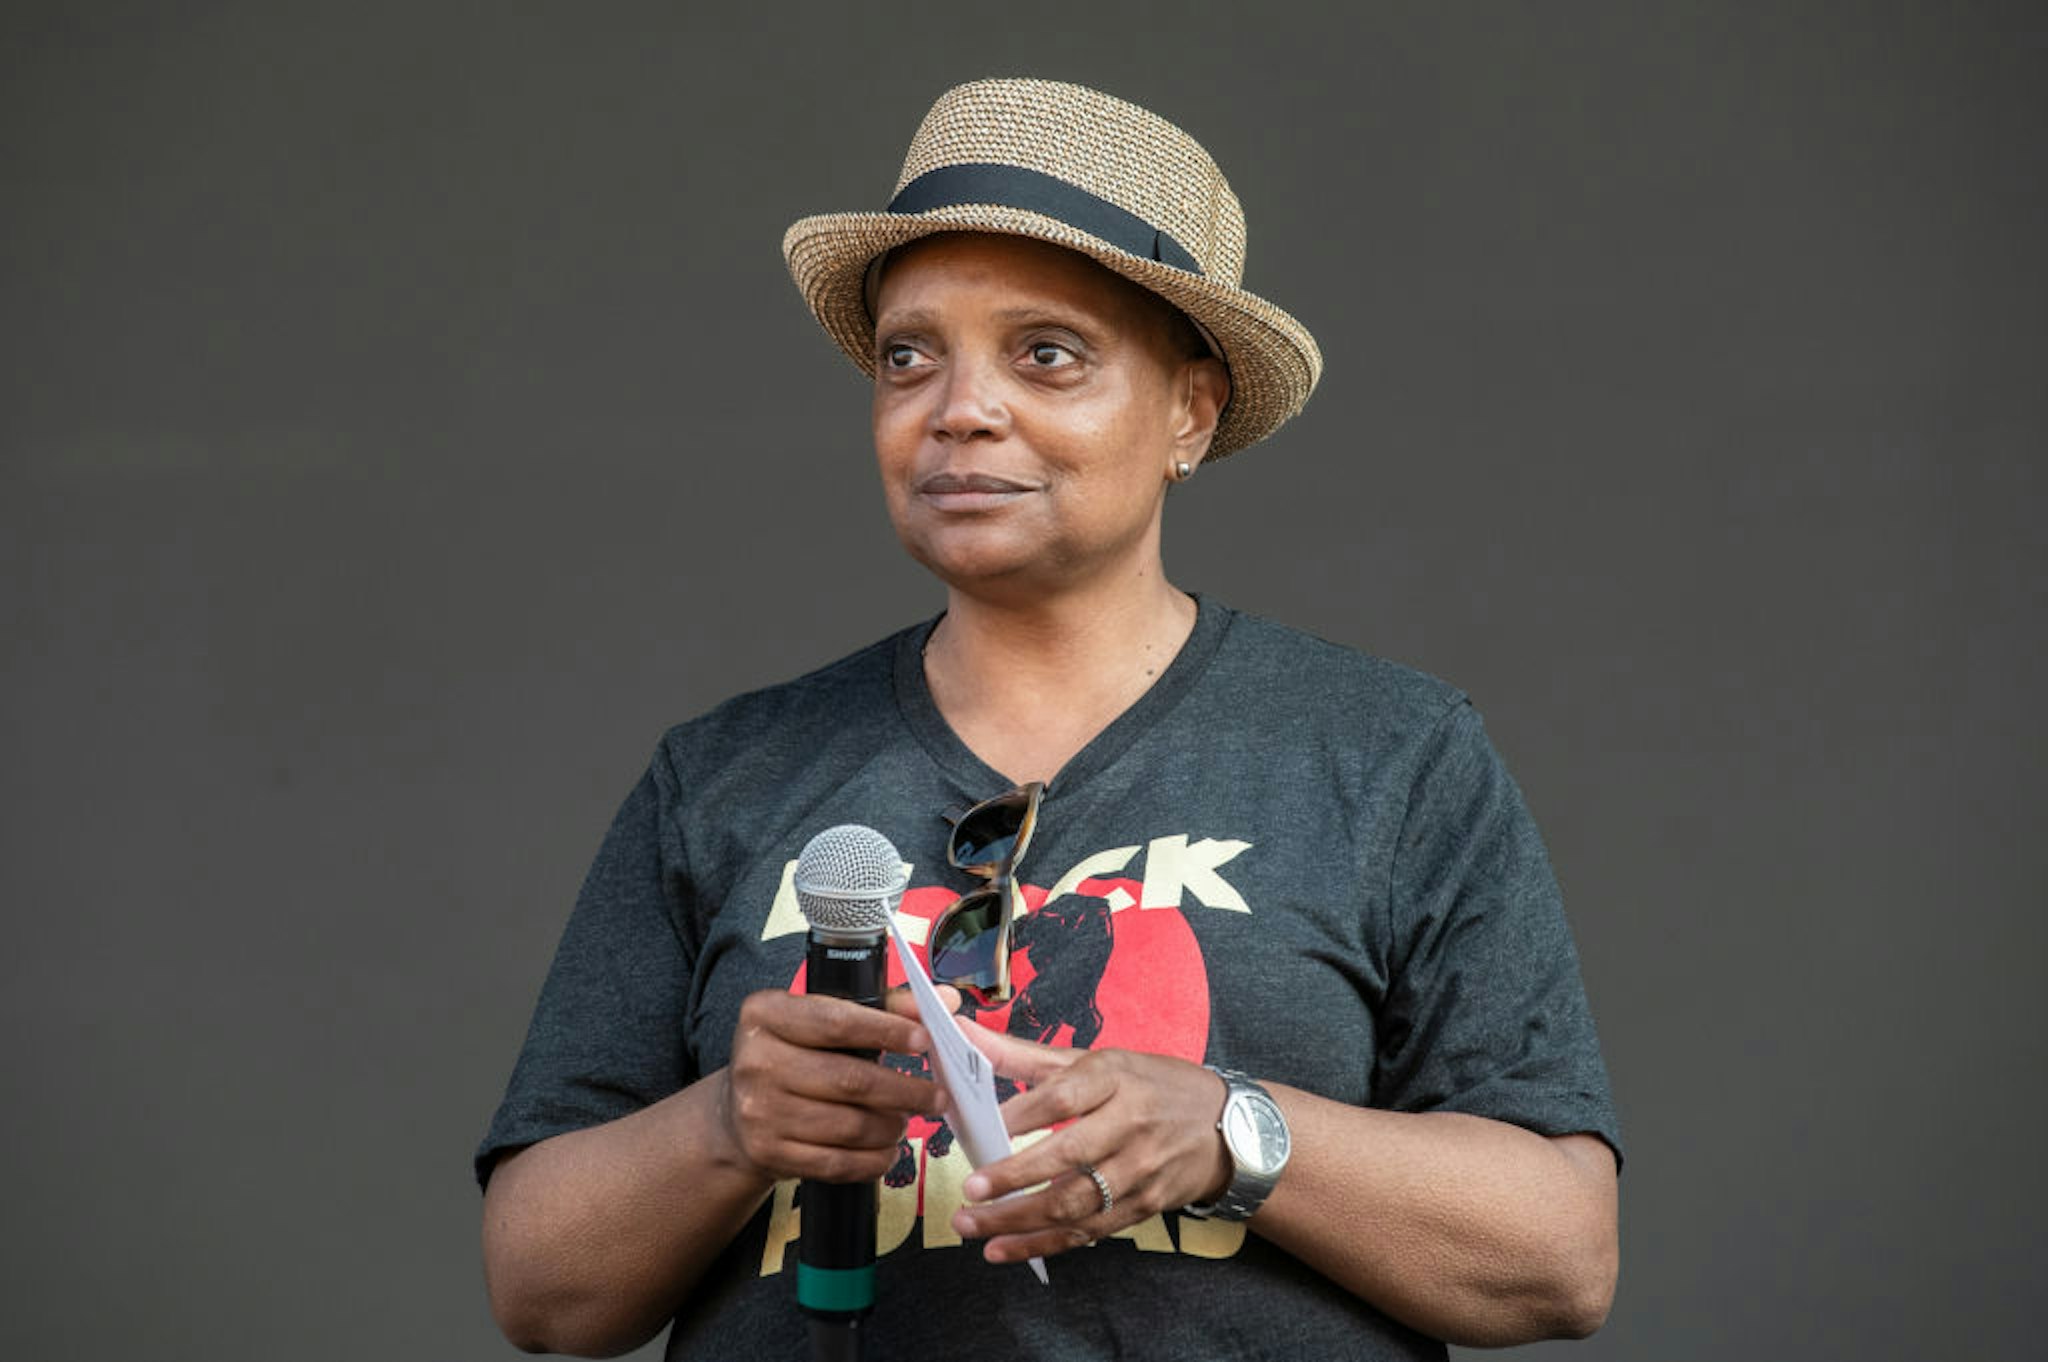 CHICAGO, ILLINOIS - JULY 29: Chicago Mayor Lori Lightfoot appears on stage during Lollapalooza 2021 at Grant Park on July 29, 2021 in Chicago, Illinois. (Photo by Timothy Hiatt/WireImage)